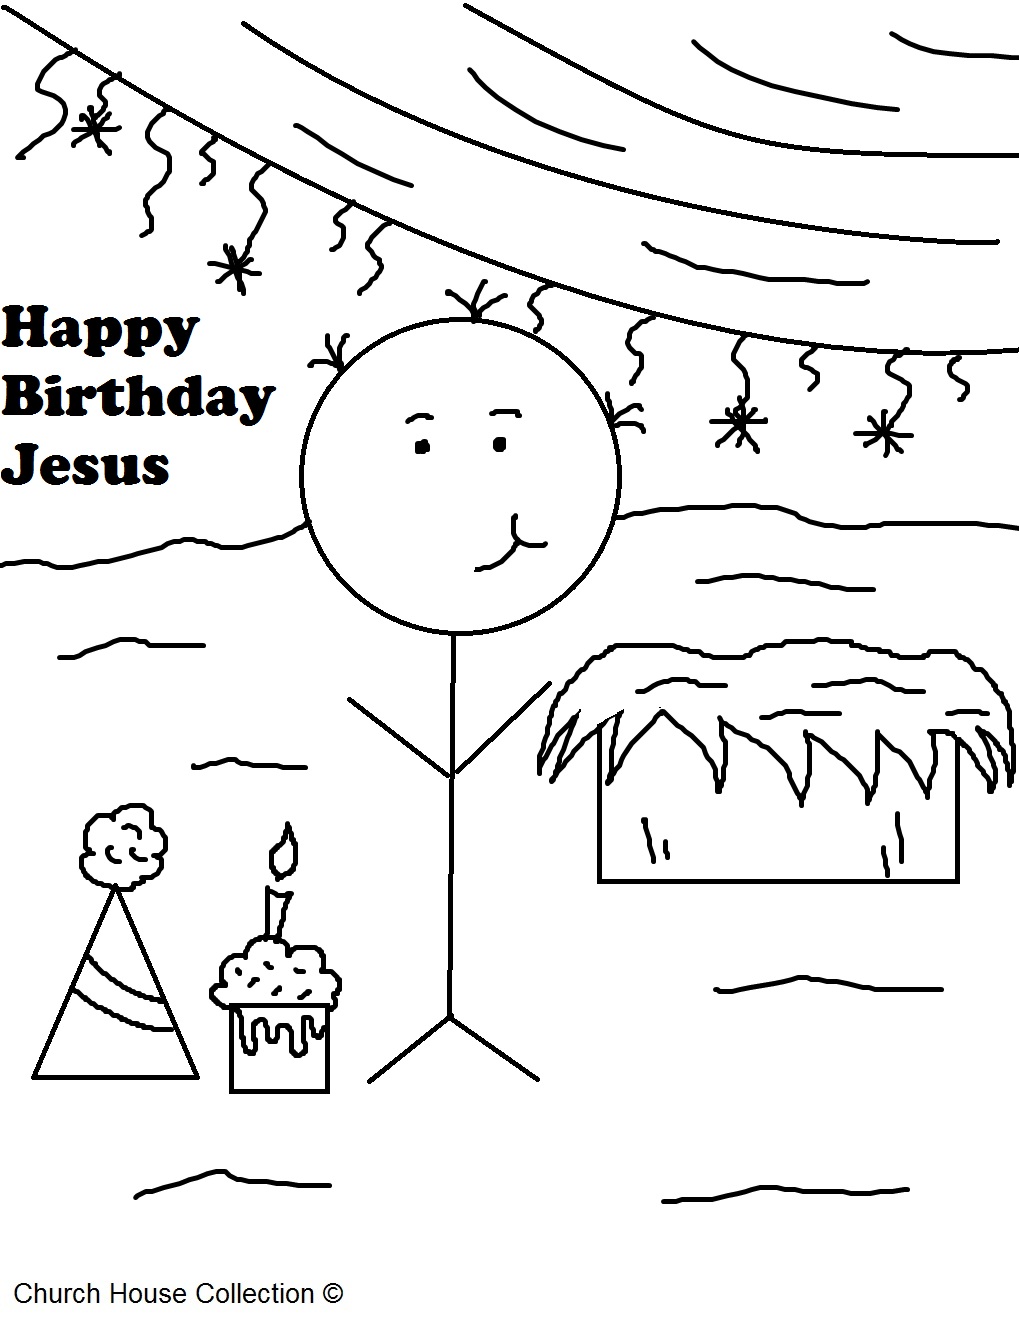 Free Happy Birthday Jesus Coloring Pages For Kids in Sunday School or Children's Church by Church House Collection 